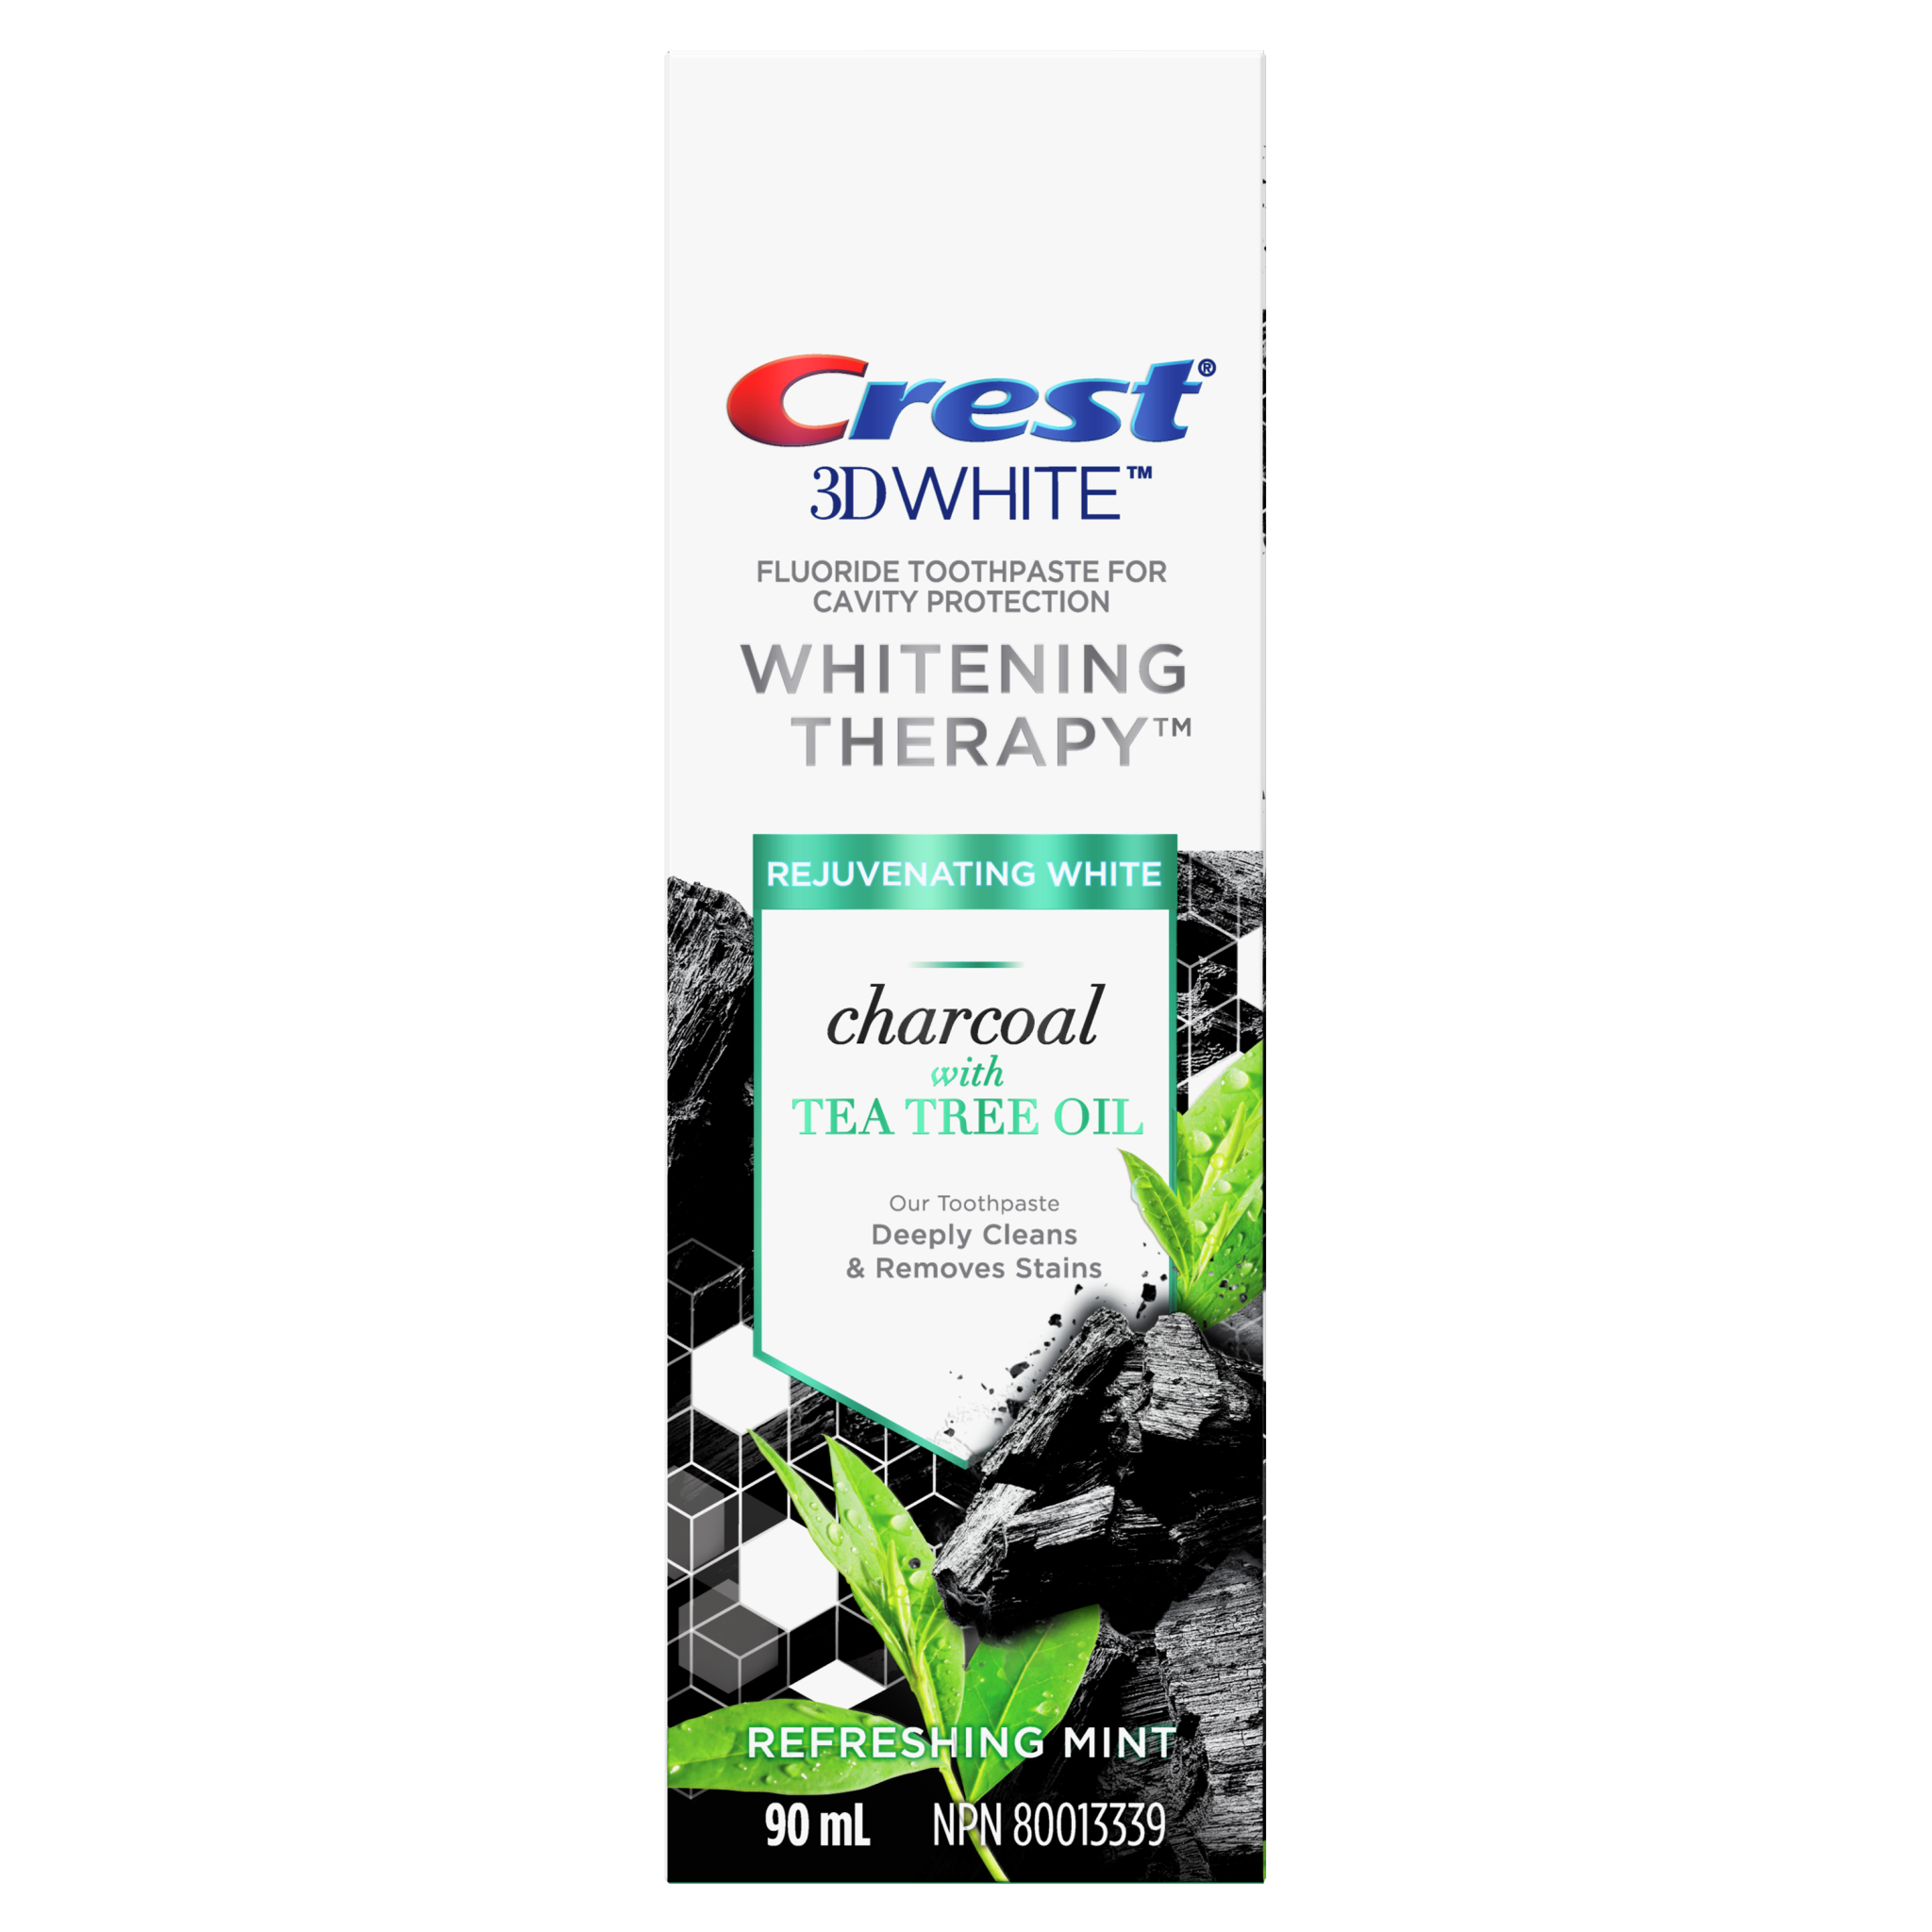 [EN]-Crest 3D White Whitening Therapy Charcoal with Tea Tree Oil-Product Images Group - new 0